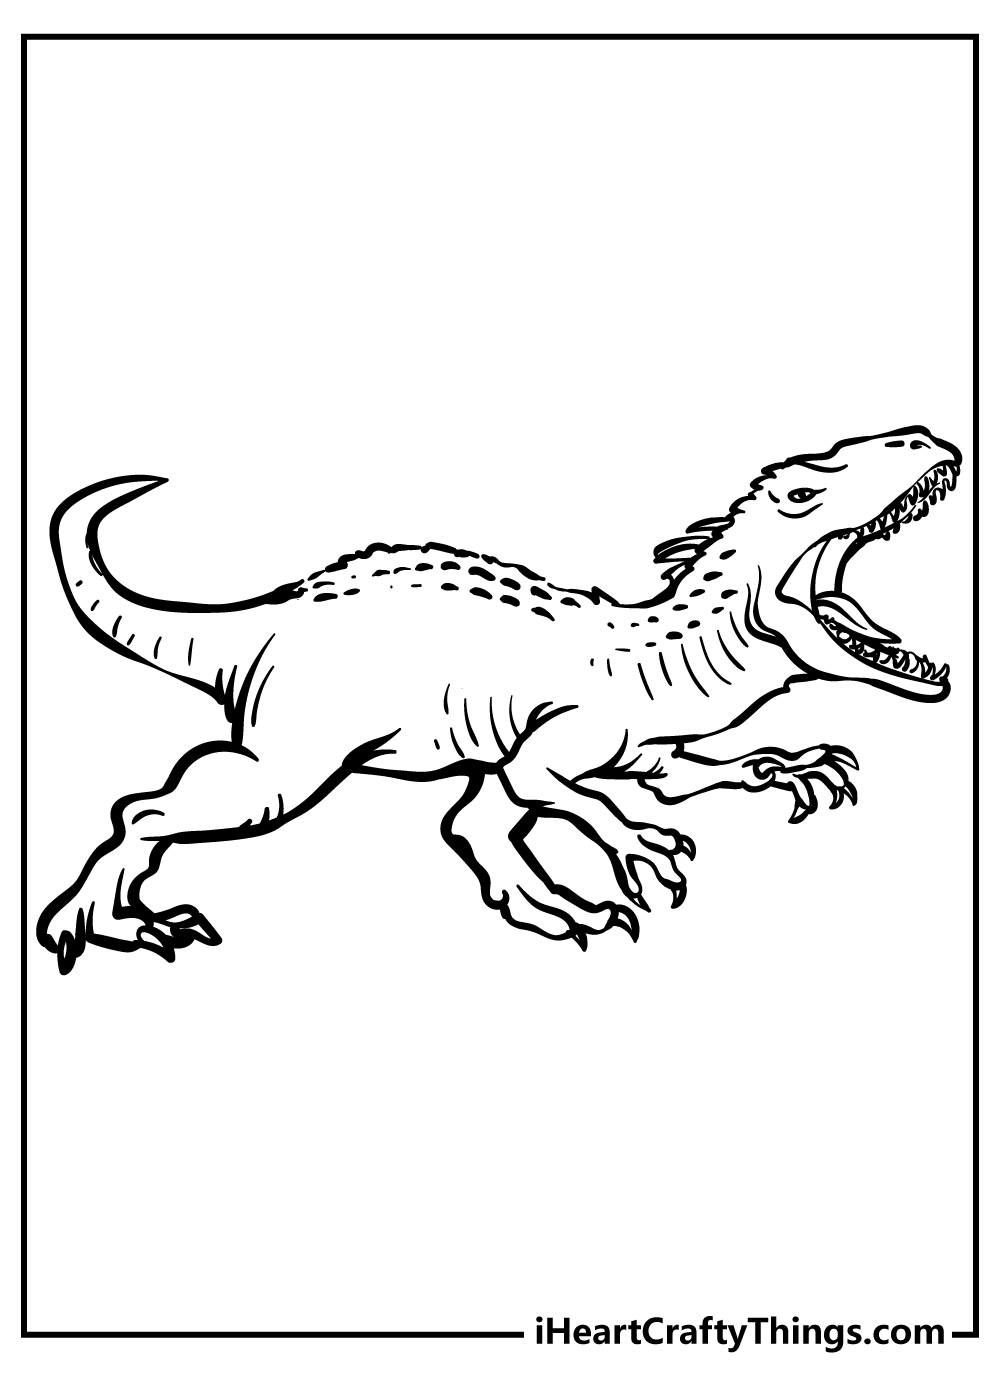 Jurassic World Coloring Pages for preschoolers free printable